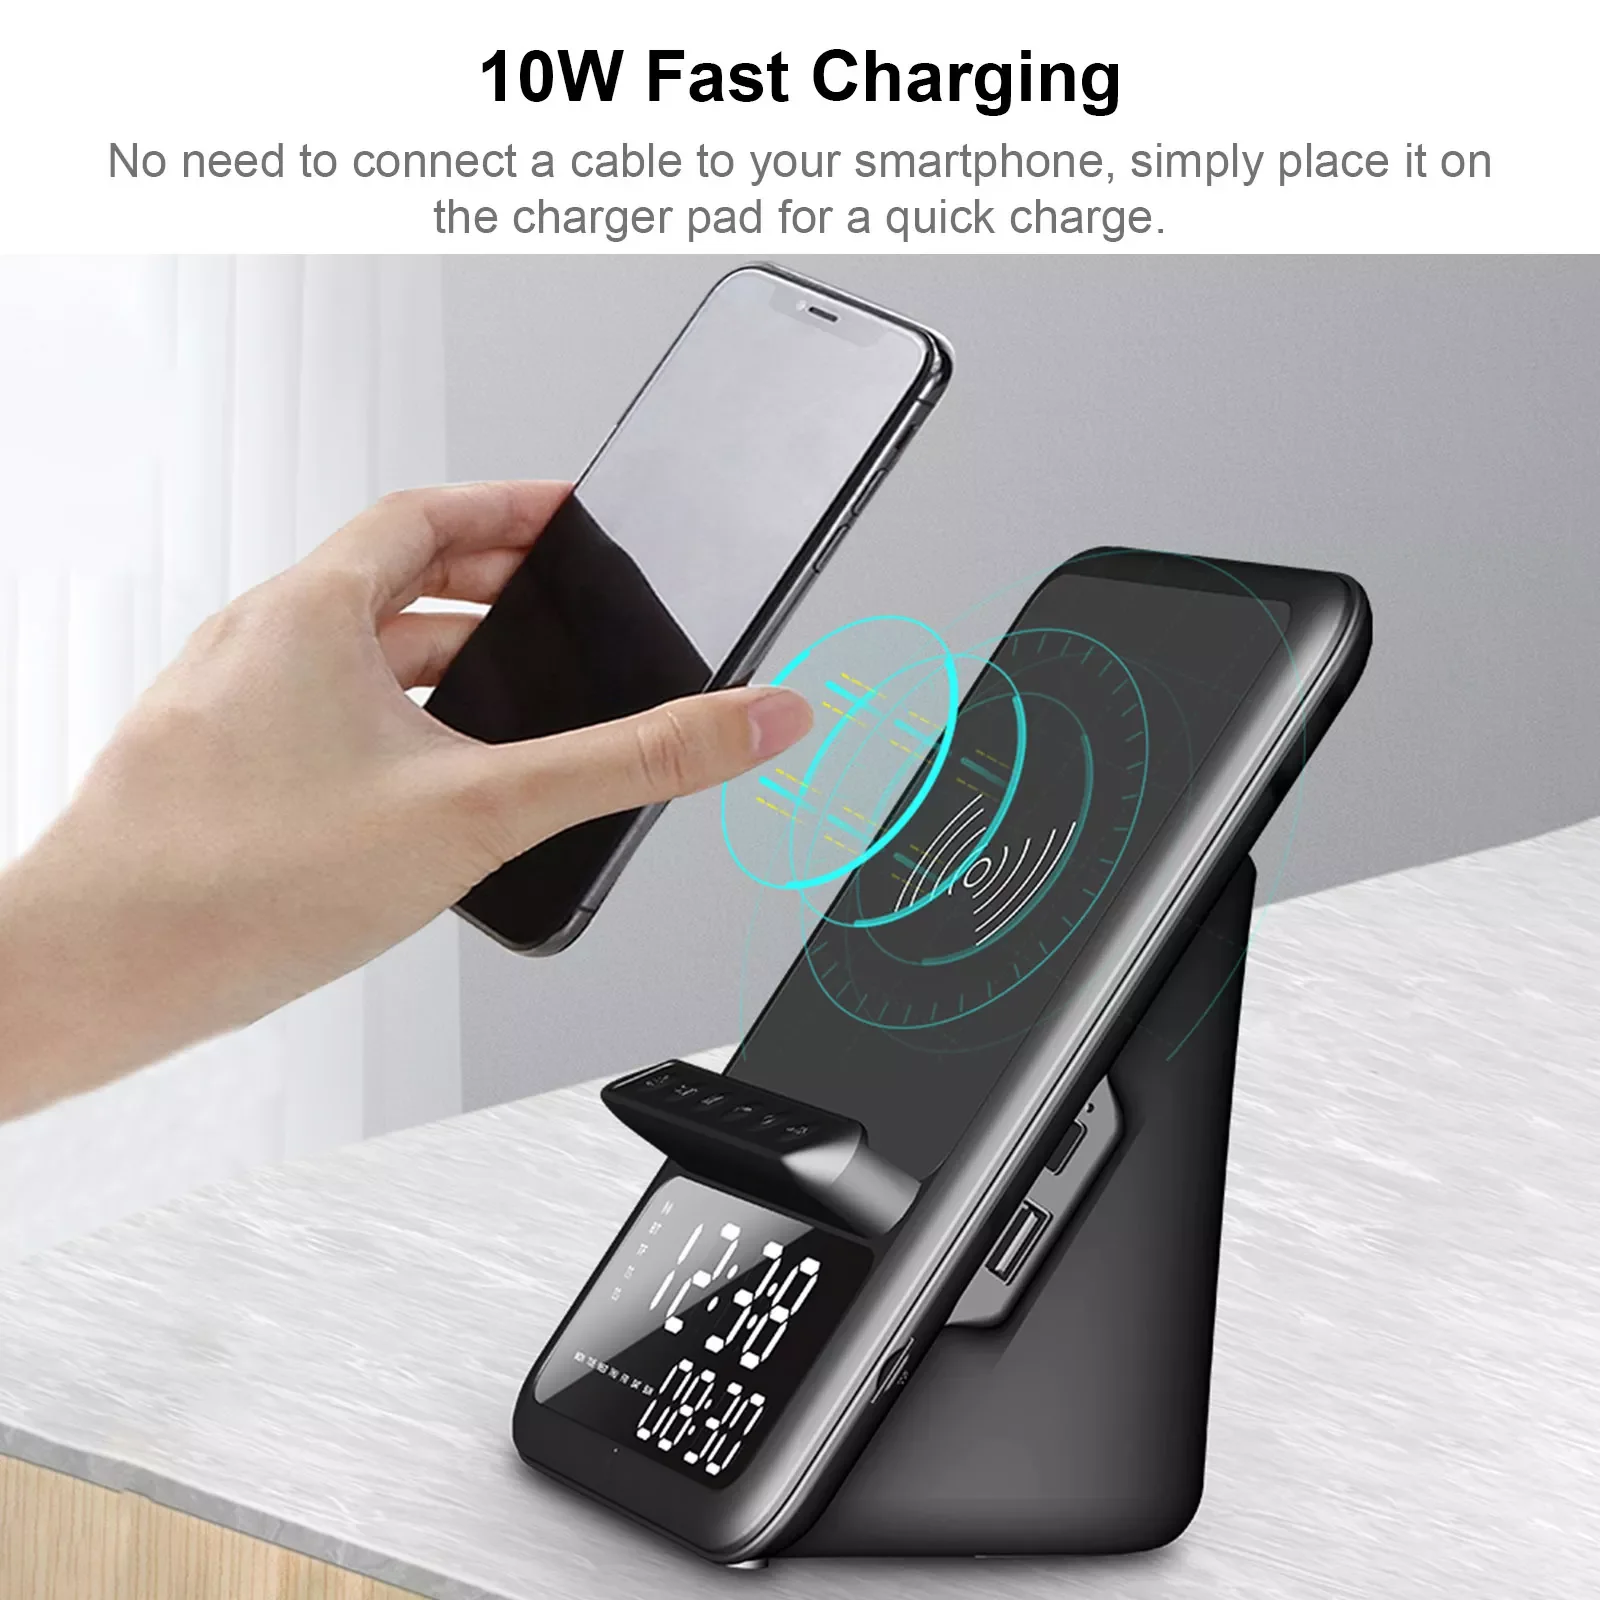 Bluetooth Speaker with Mic Wireless Charger Fast Charging Phone Stand Holder Alarm Clock Time Display Support TF Music Player enlarge